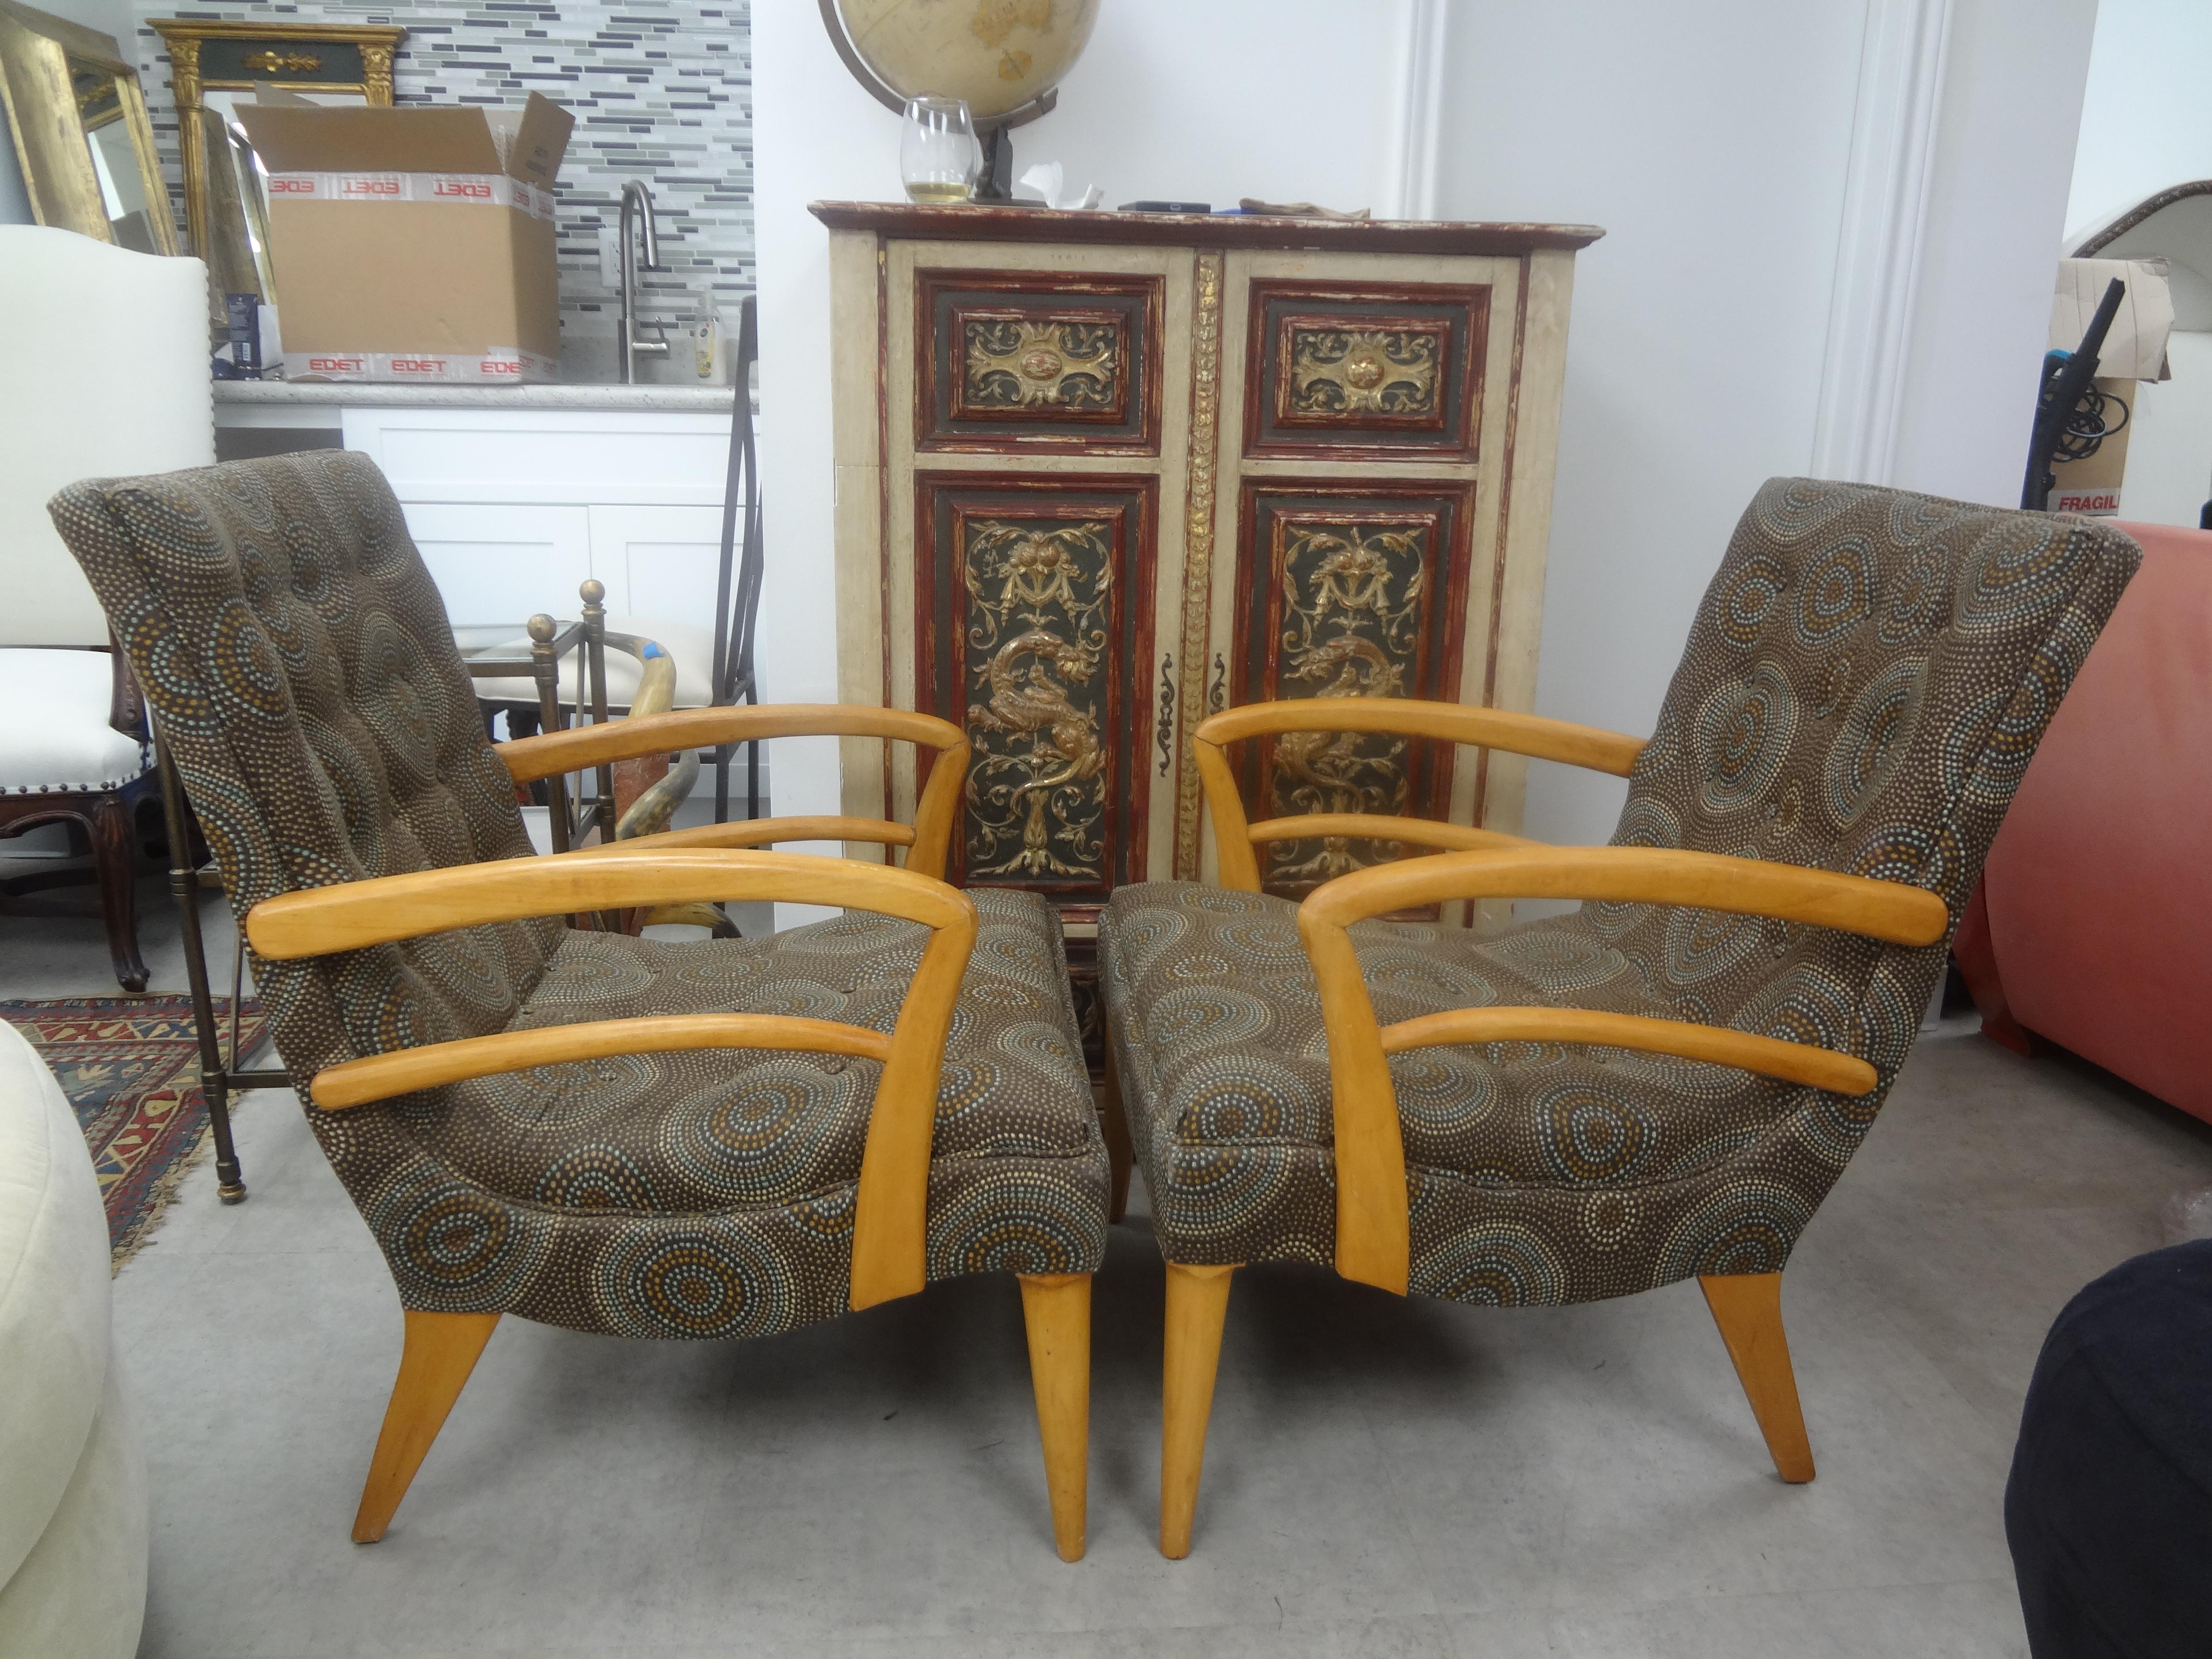 Pair of Italian Modern Fruitwood Lounge Chairs.
These shapely Italian mid century modern Paolo Buffa style fruitwood lounge chairs are most comfortable and have been upholstered in Donghia fabric.
Lovely from every angle!